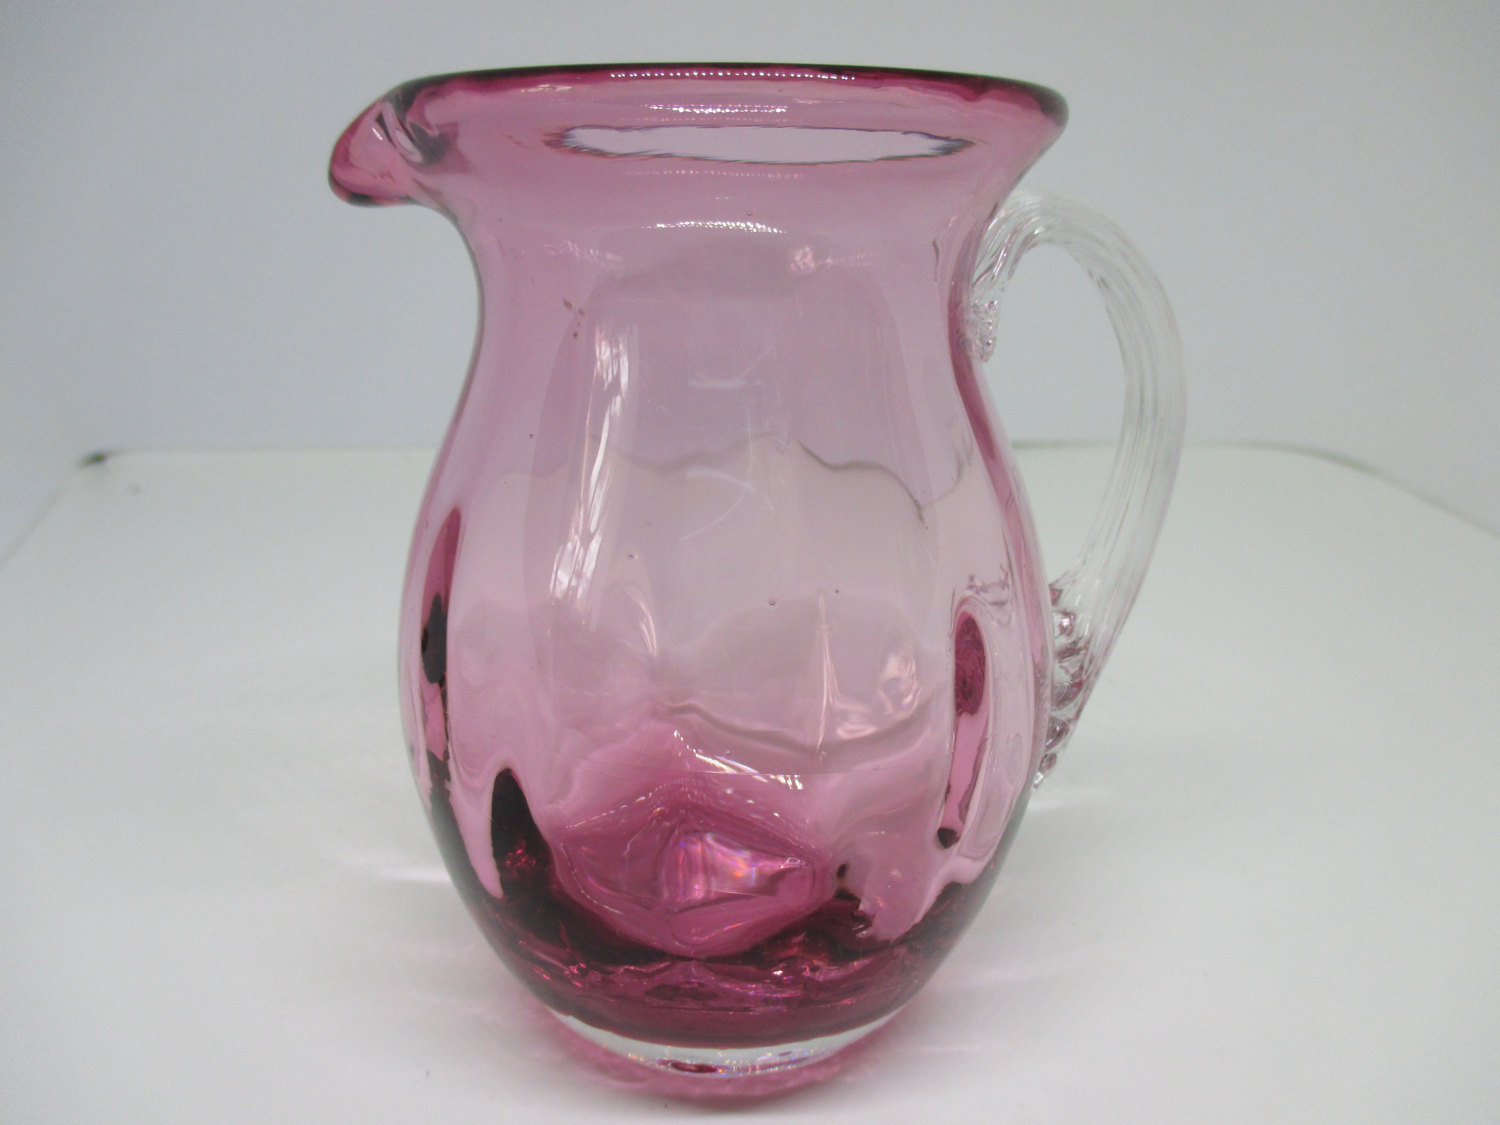 Small Vintage Hand Blown Ribbed Textured Clear Glass Serving Pitcher, -  Ruby Lane